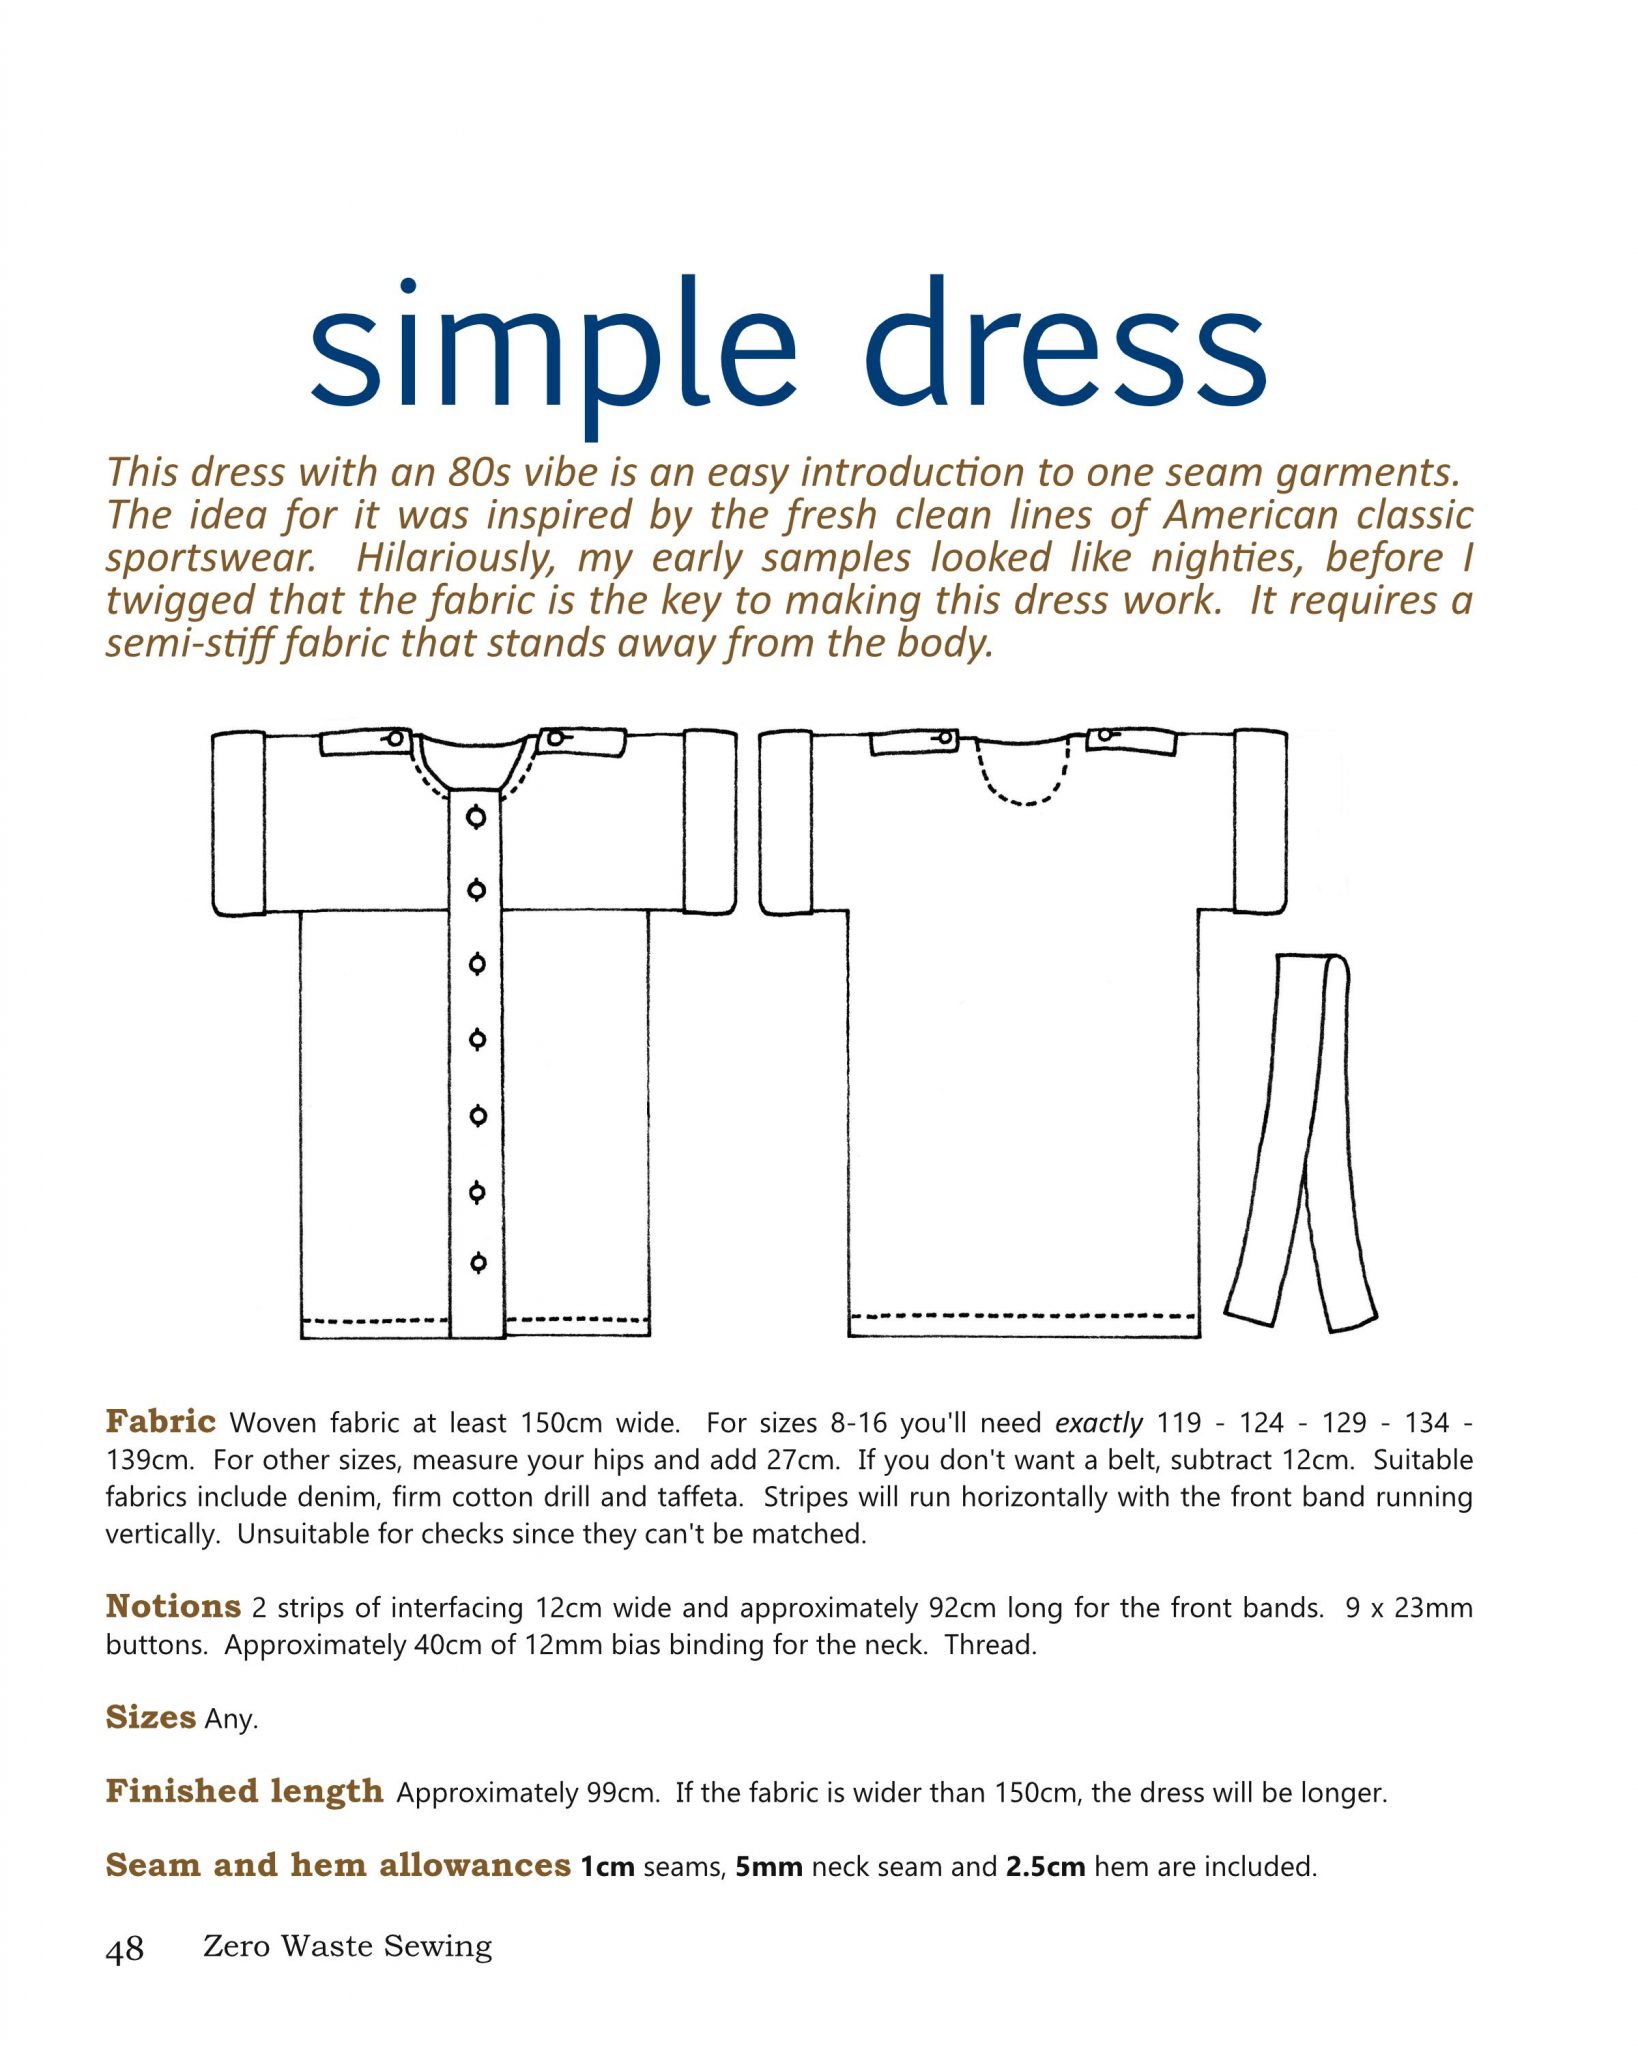 Zero Waste Sewing book 2020 January 31 Page 48 Simple oneseam dress ...